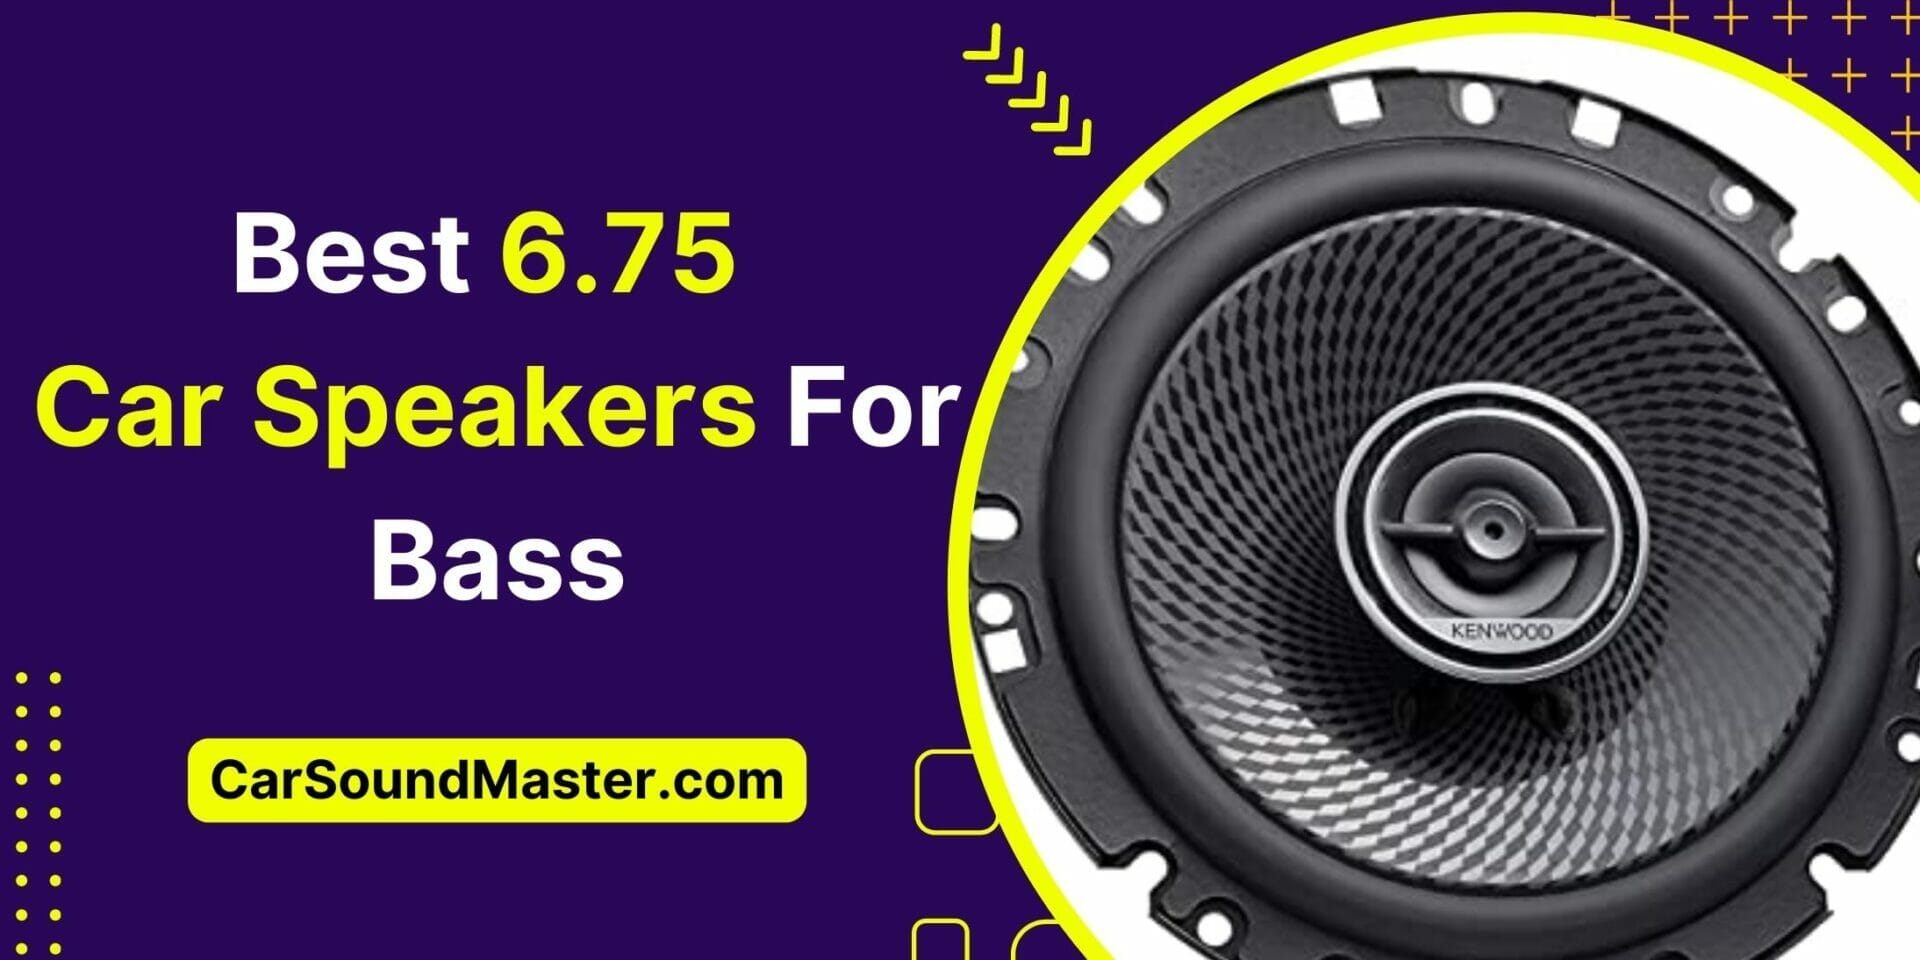 This Month I Tried Dozens of 6.75 Car Speakers for Bass So Let’s Find Out Which One is Roof-Smashing